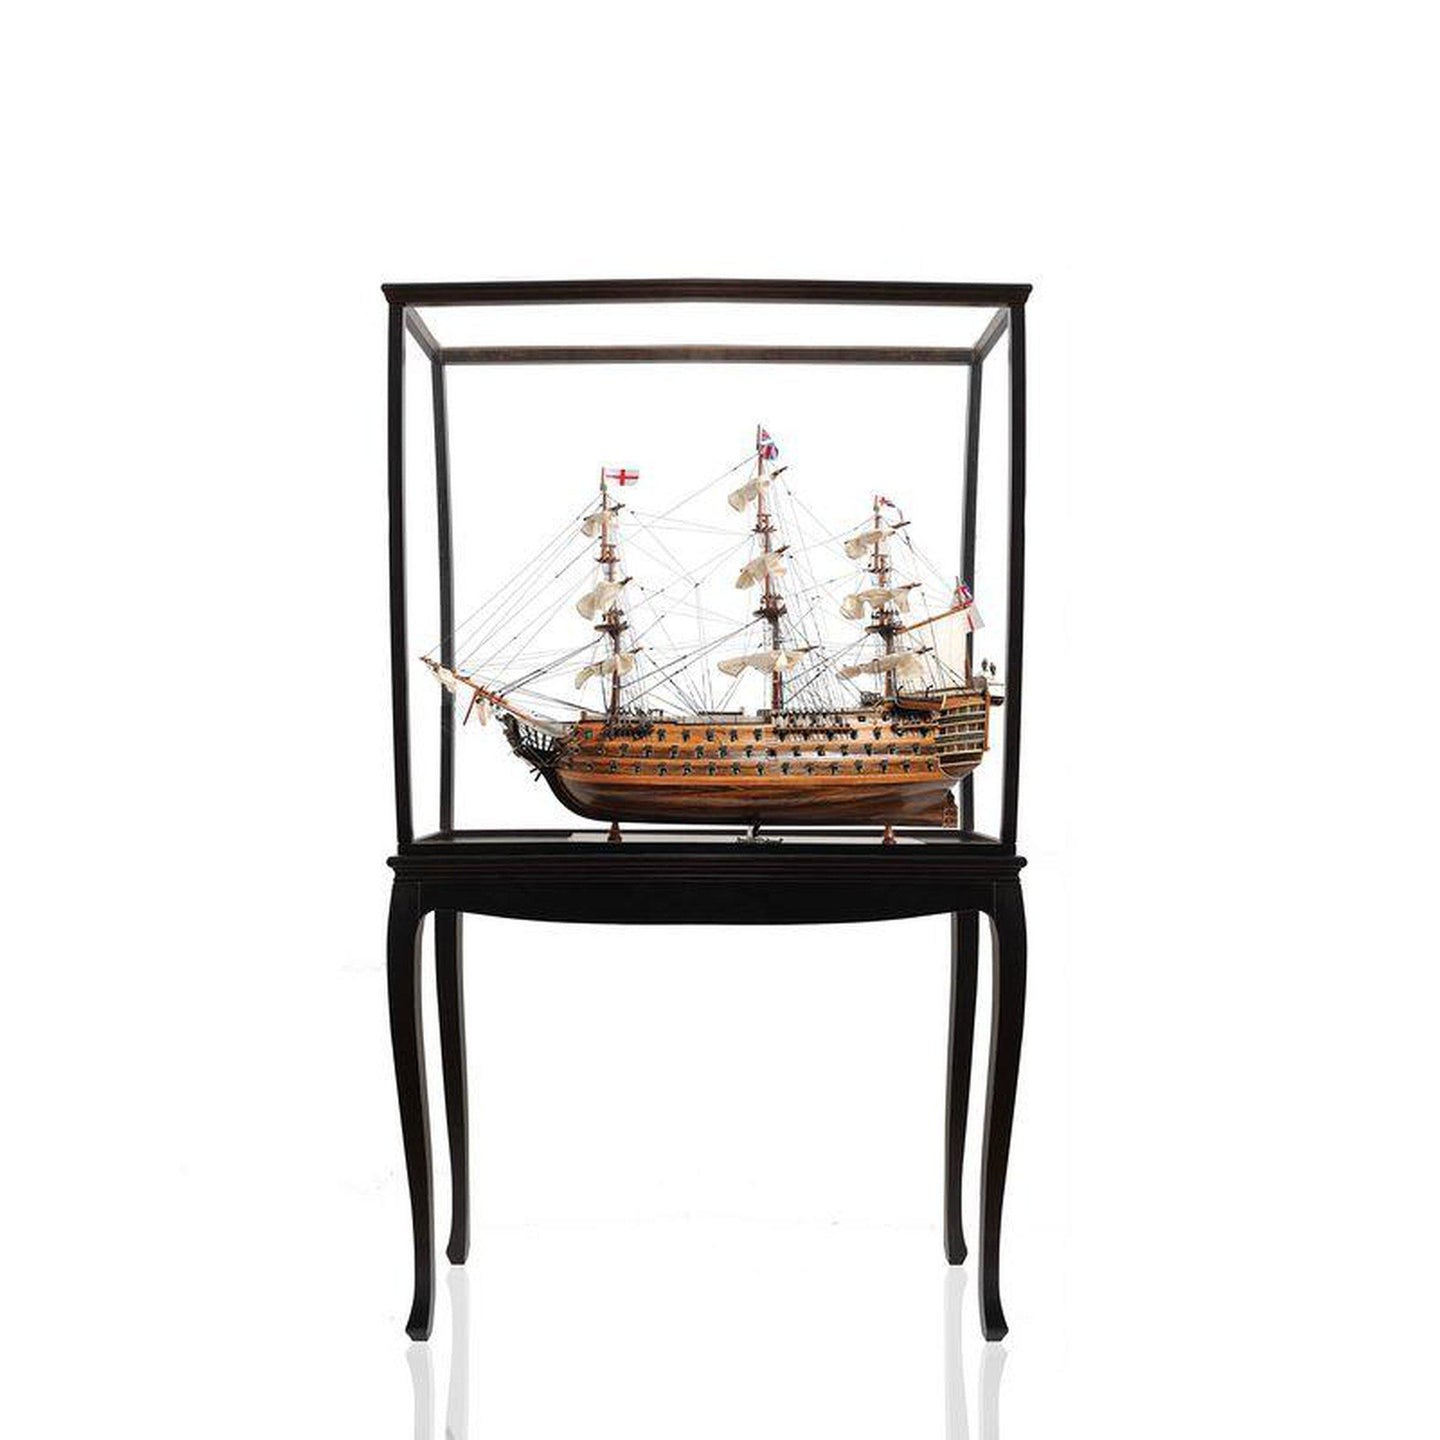 Old Modern HMS Victory Large With Floor Display Case T034B